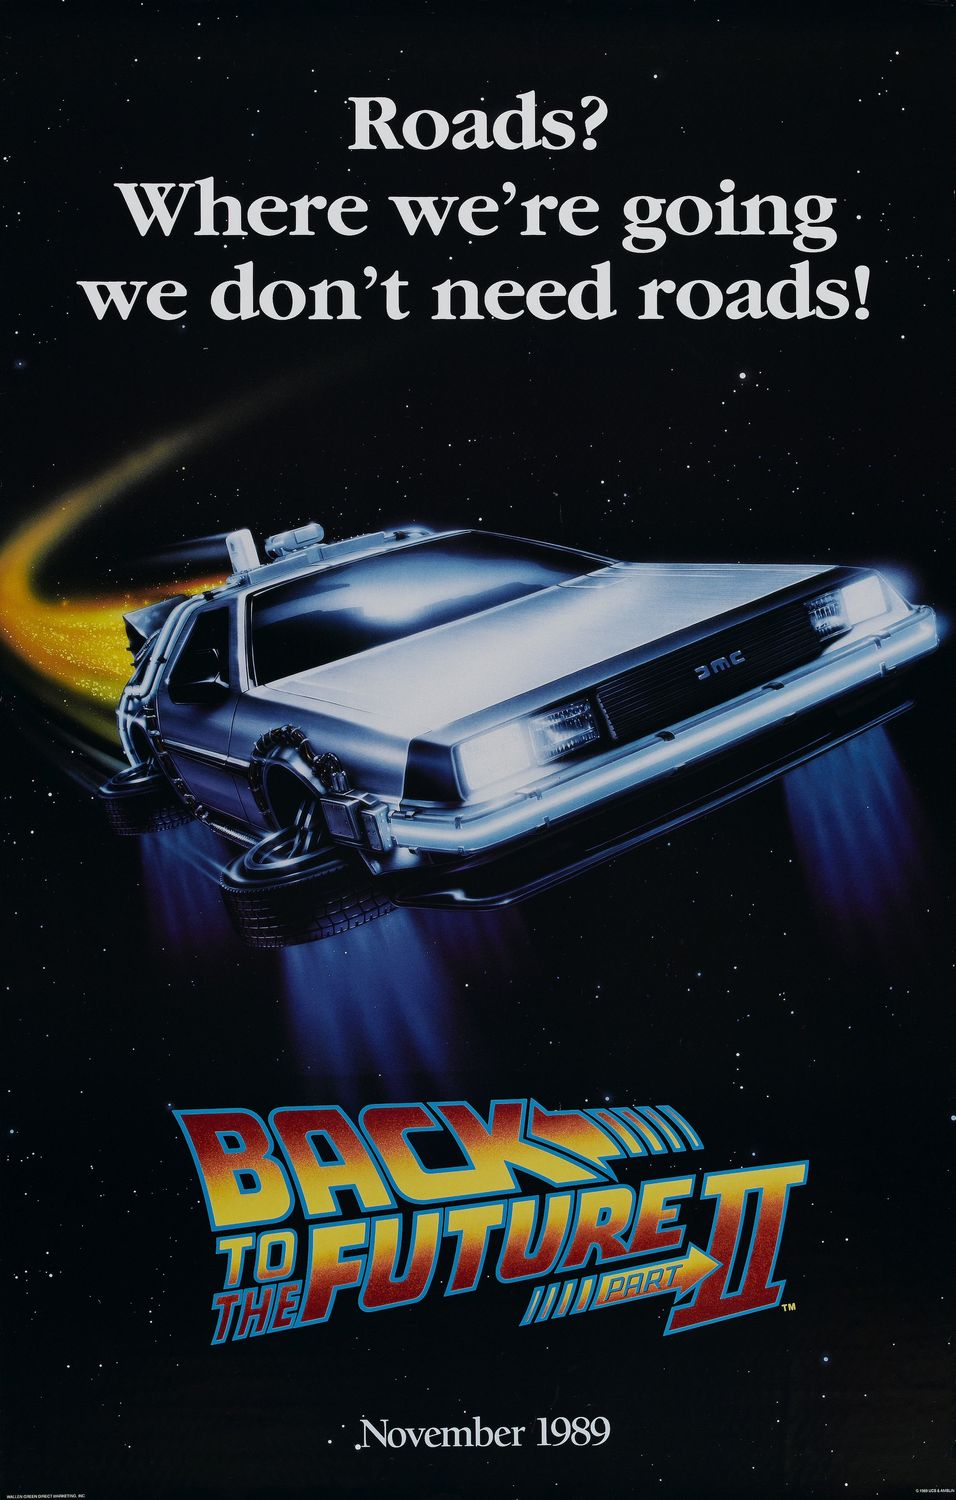 back to the future - Roads? Where we're going we don't need roads! Ni Part